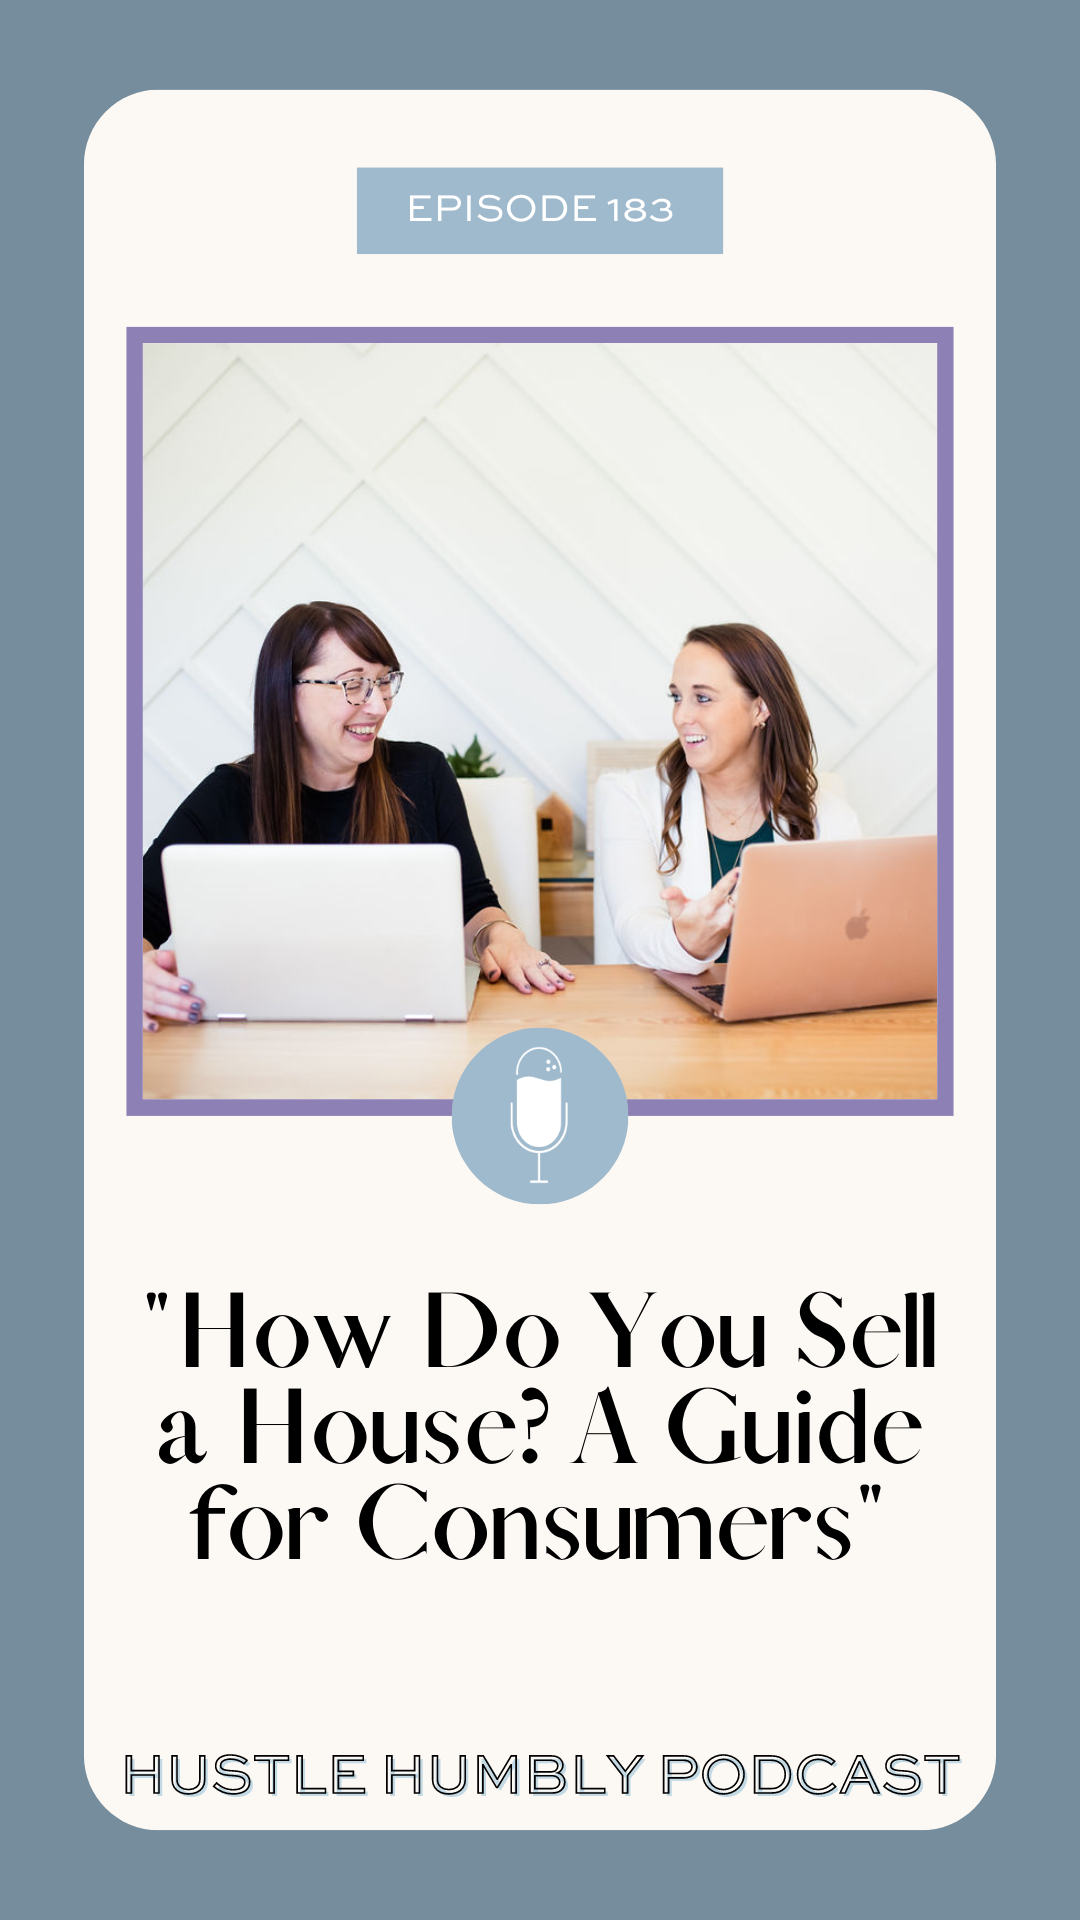 Hustle Humbly Podcast Podcast Episode 183: How Do You Sell a House? A Guide for Consumers